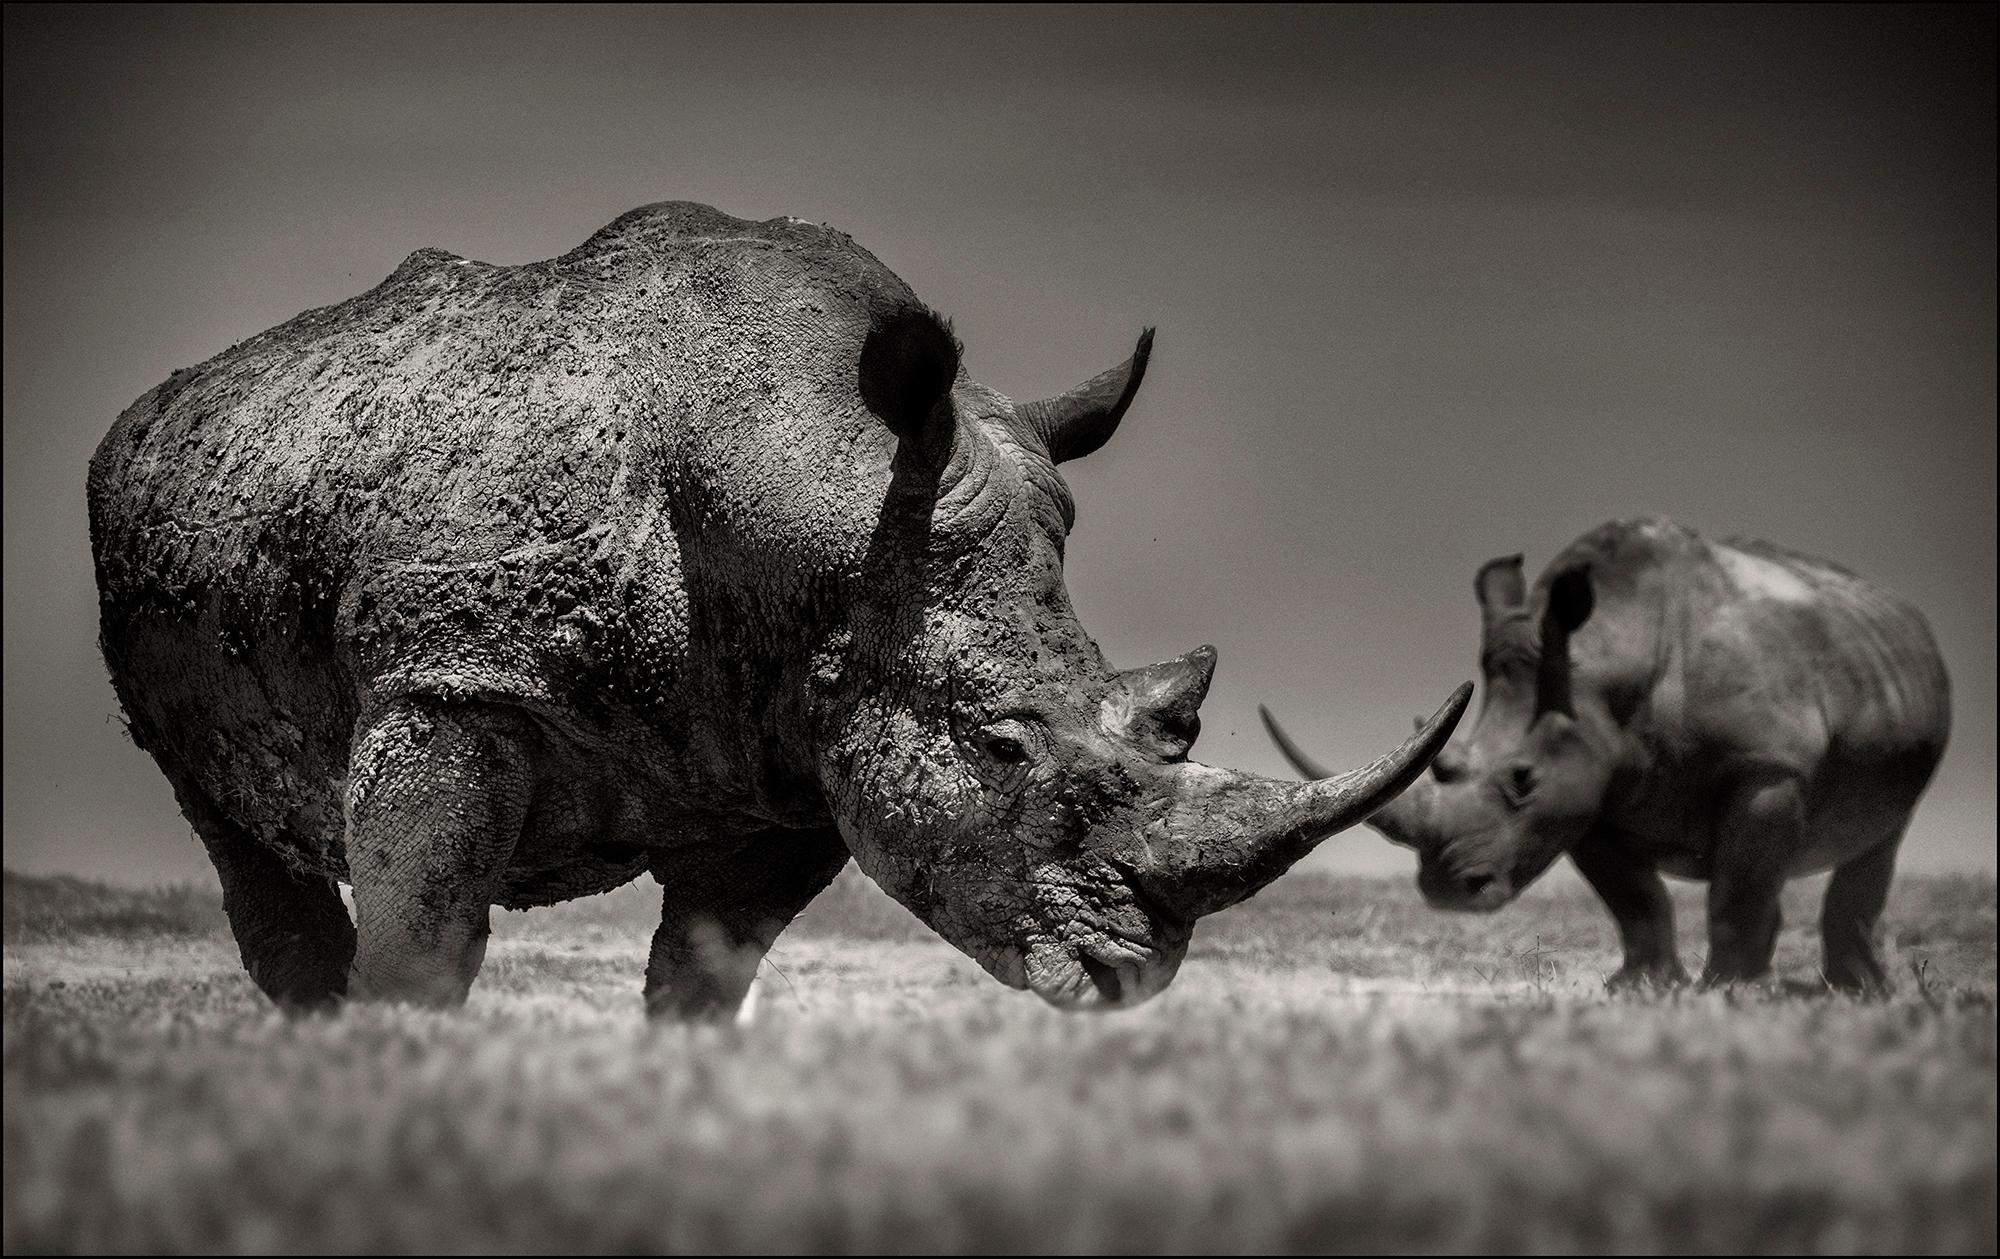 Joachim Schmeisser Black and White Photograph - Crossing Horns, animal, wildlife, black and white photography, rhino